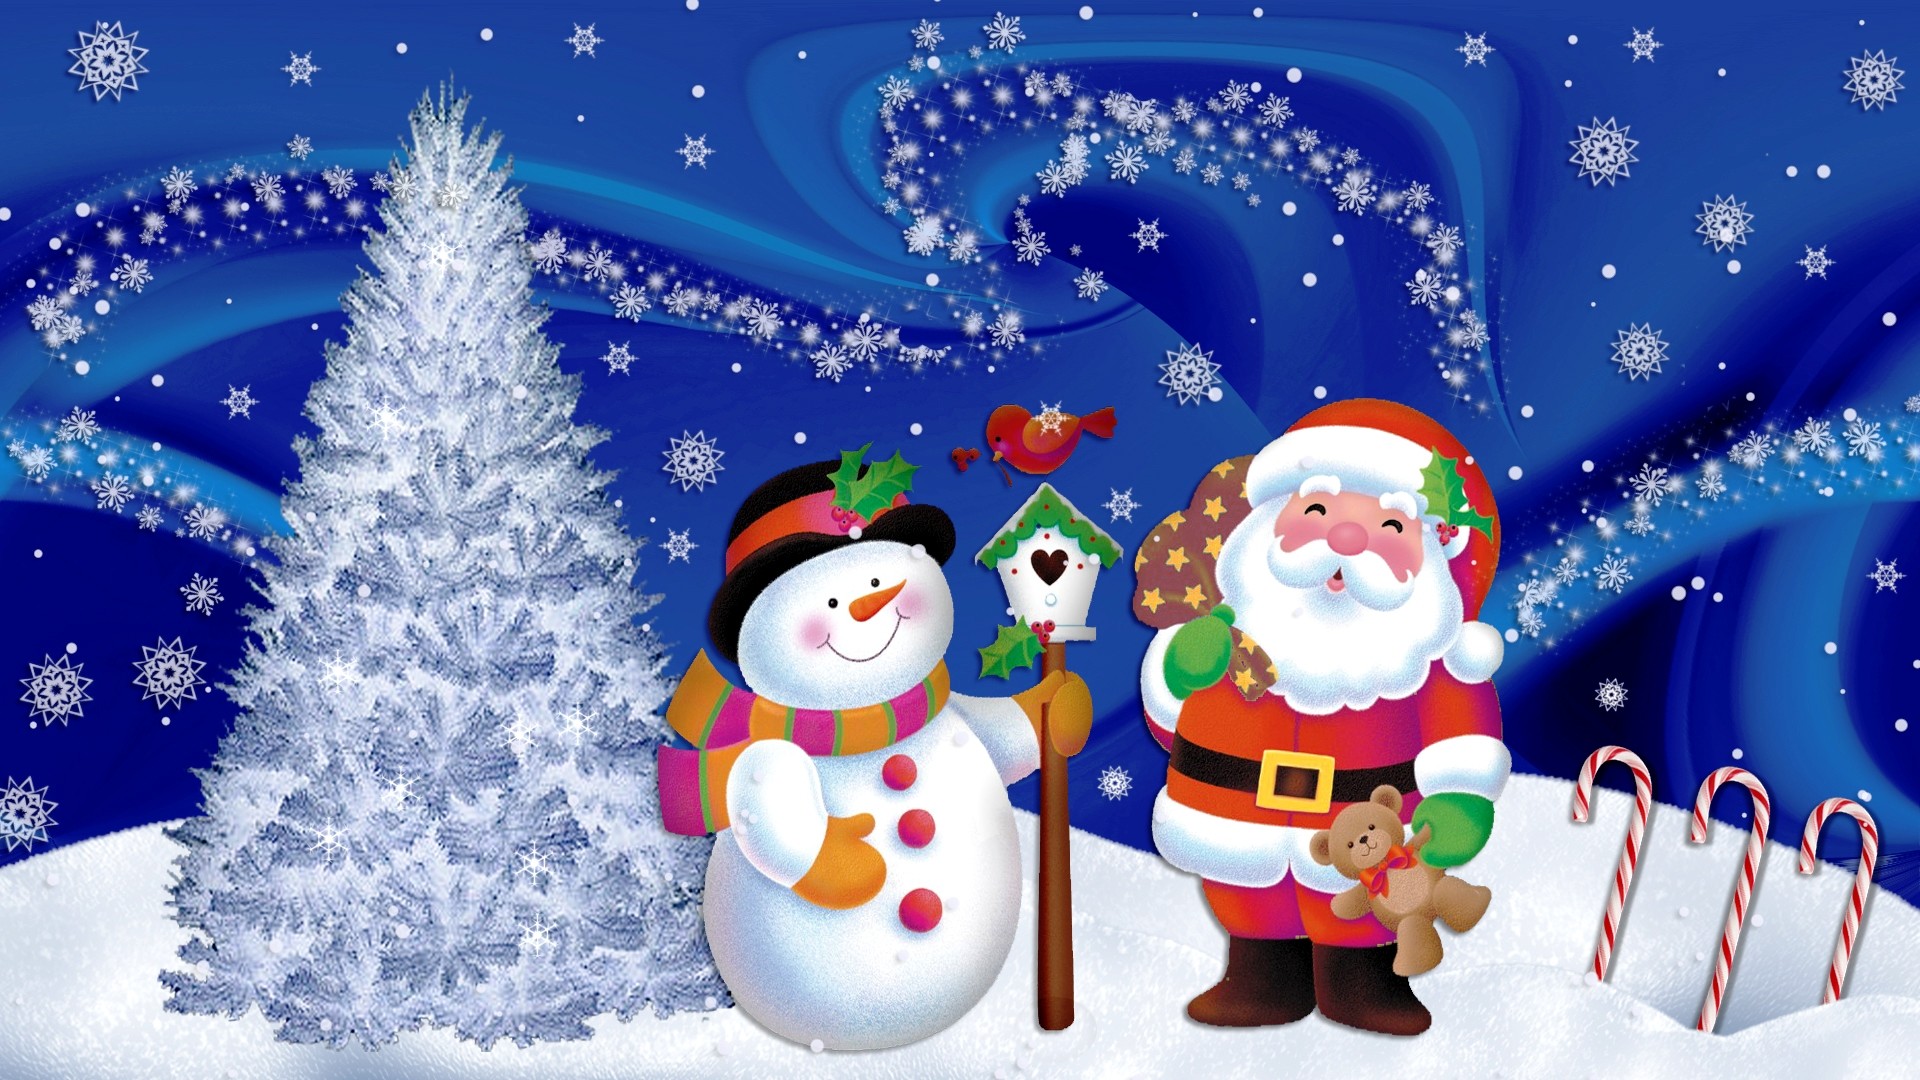 1920x1080 Animated Christmas Wallpapers Free Download Snowman and Santa Claus.